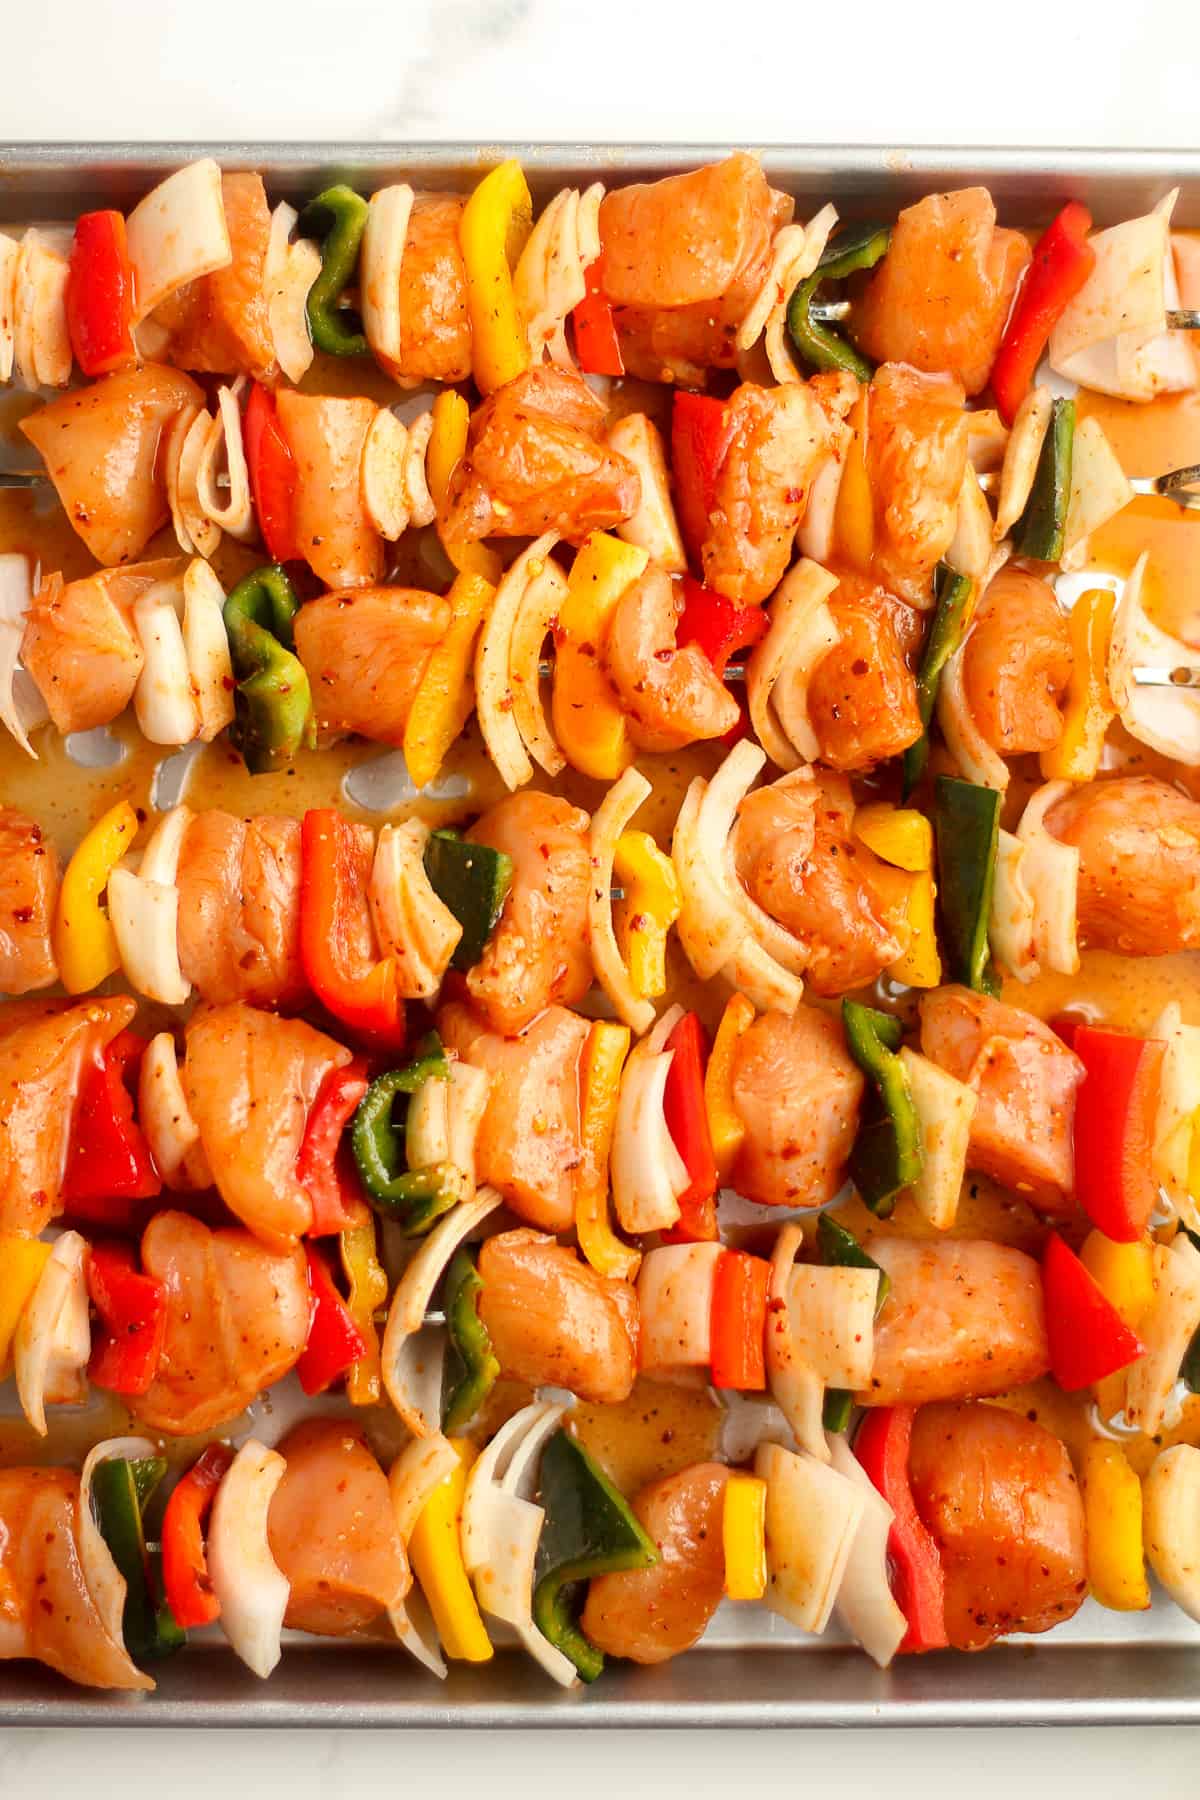 The raw kabobs, prepared for grilling with alternating chicken, onion, and peppers.